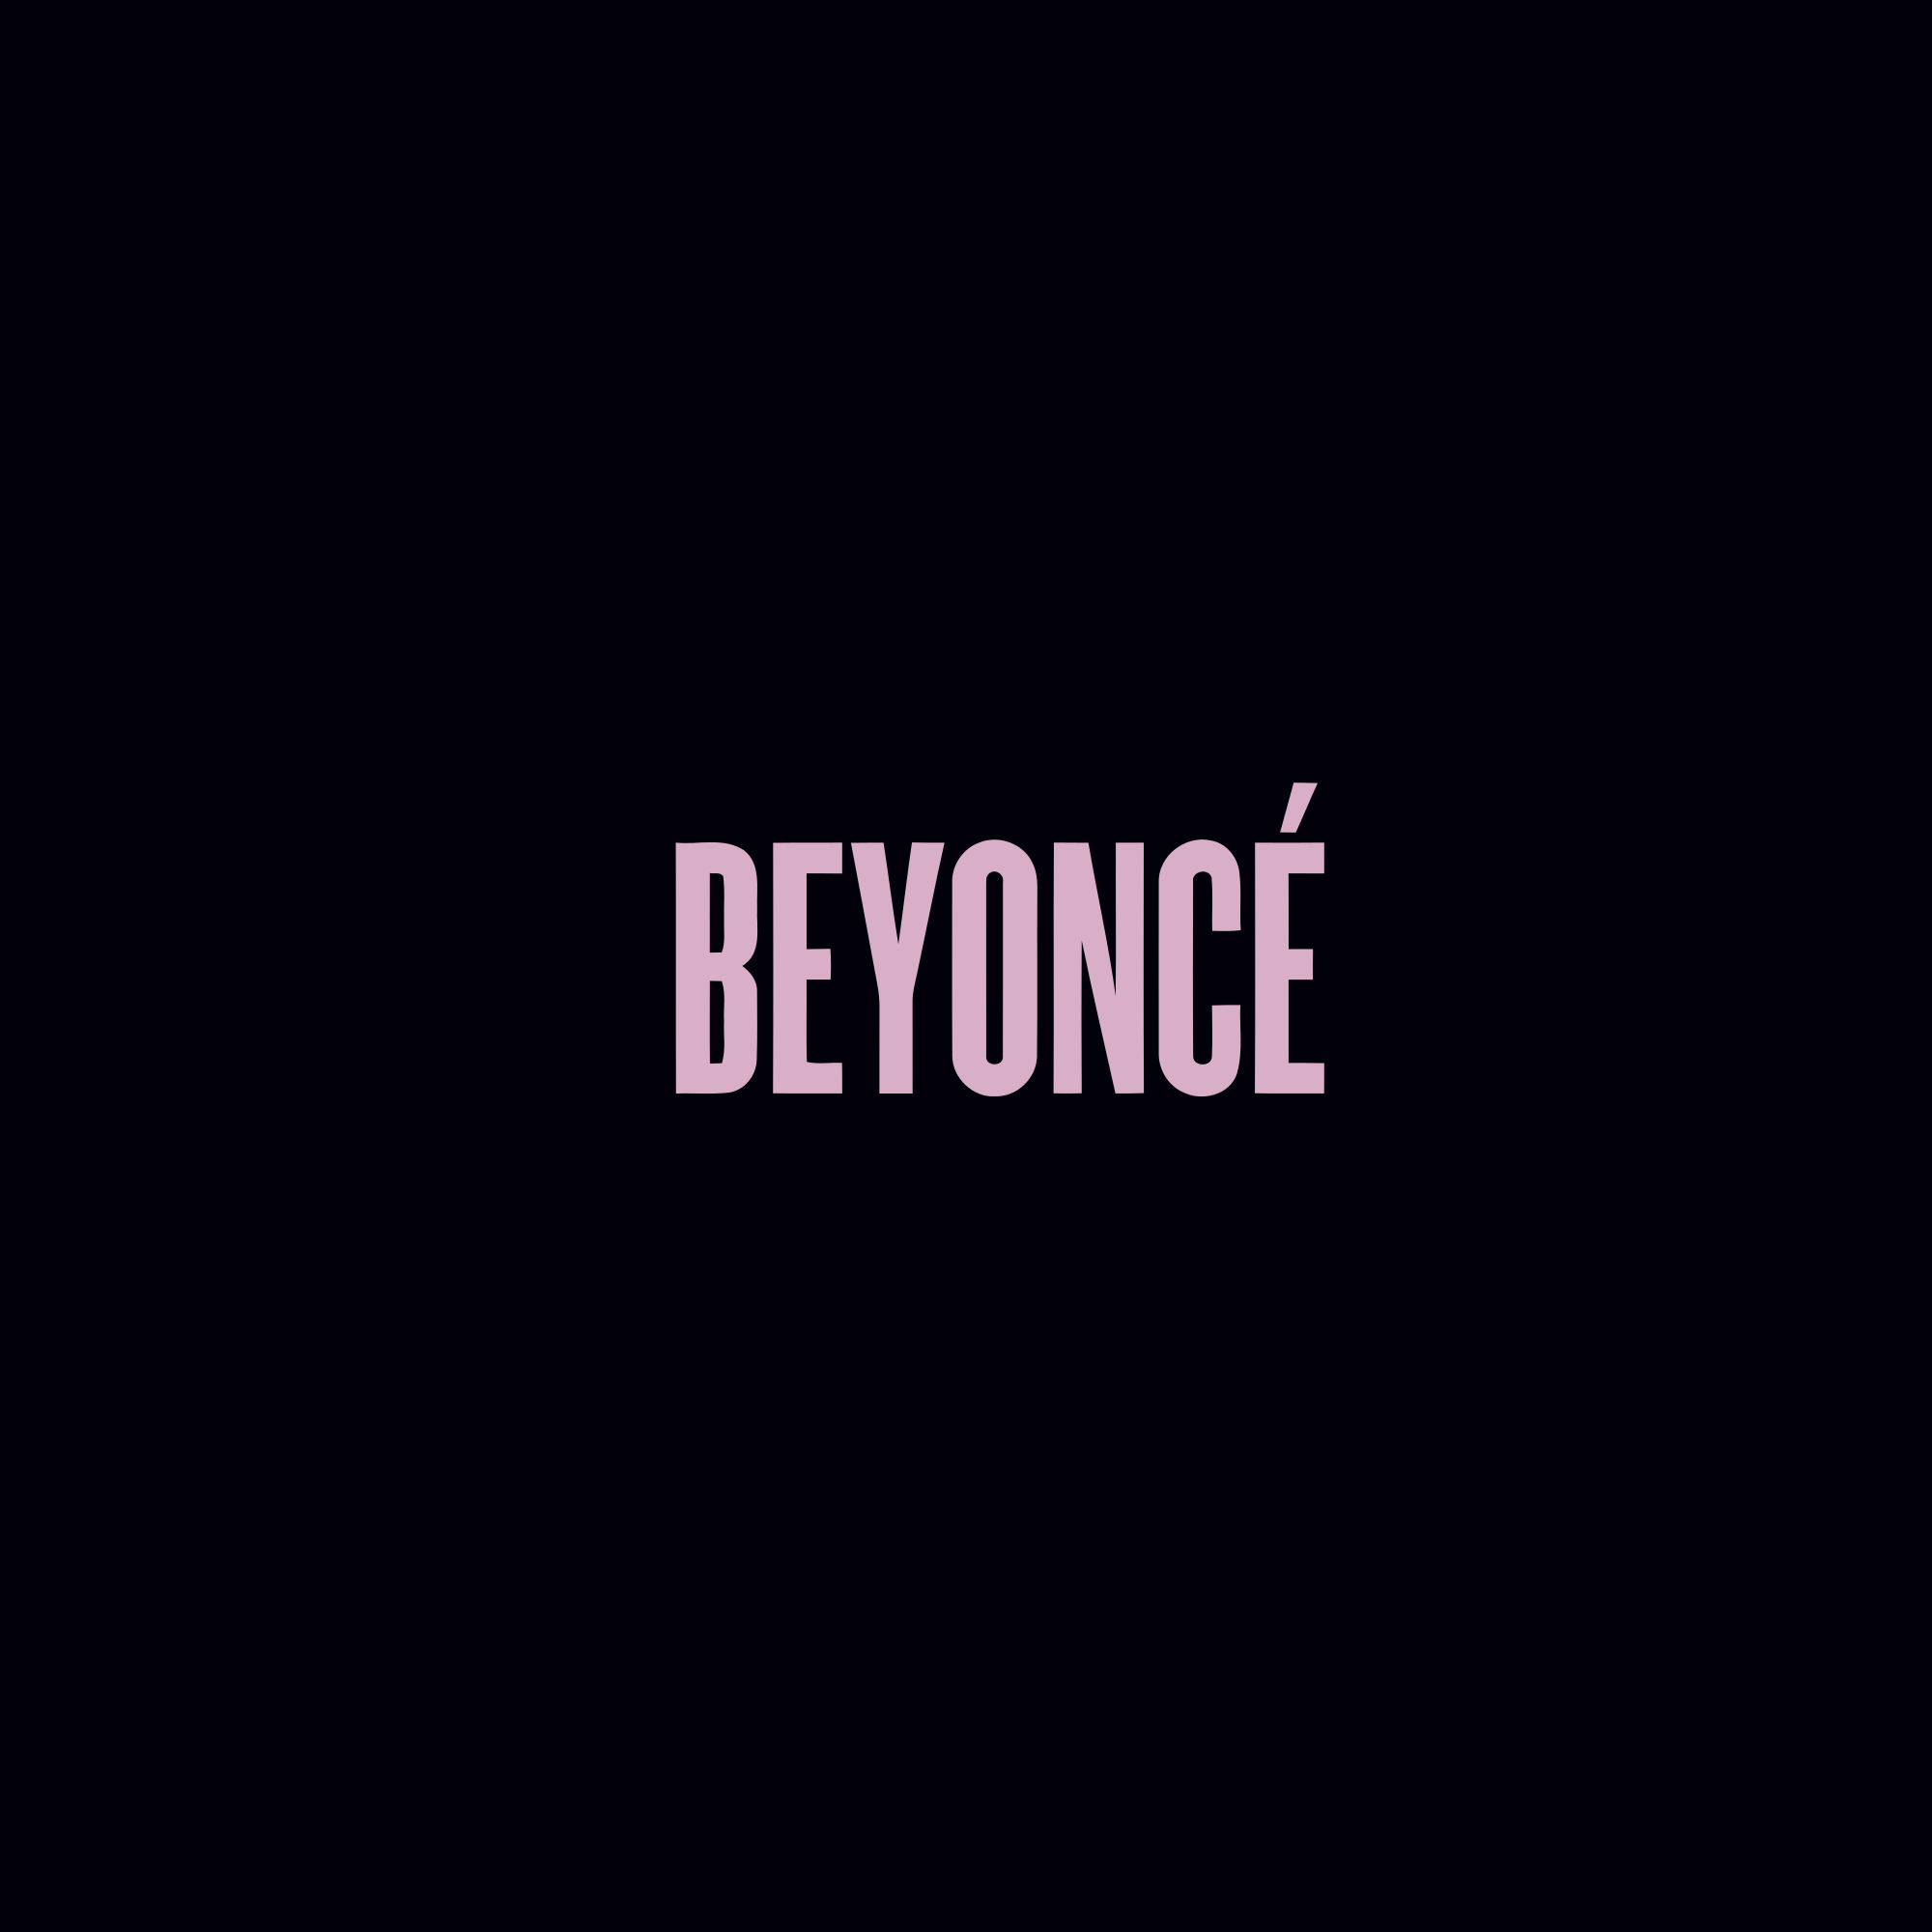 Beyonce's self-titled album is out now.